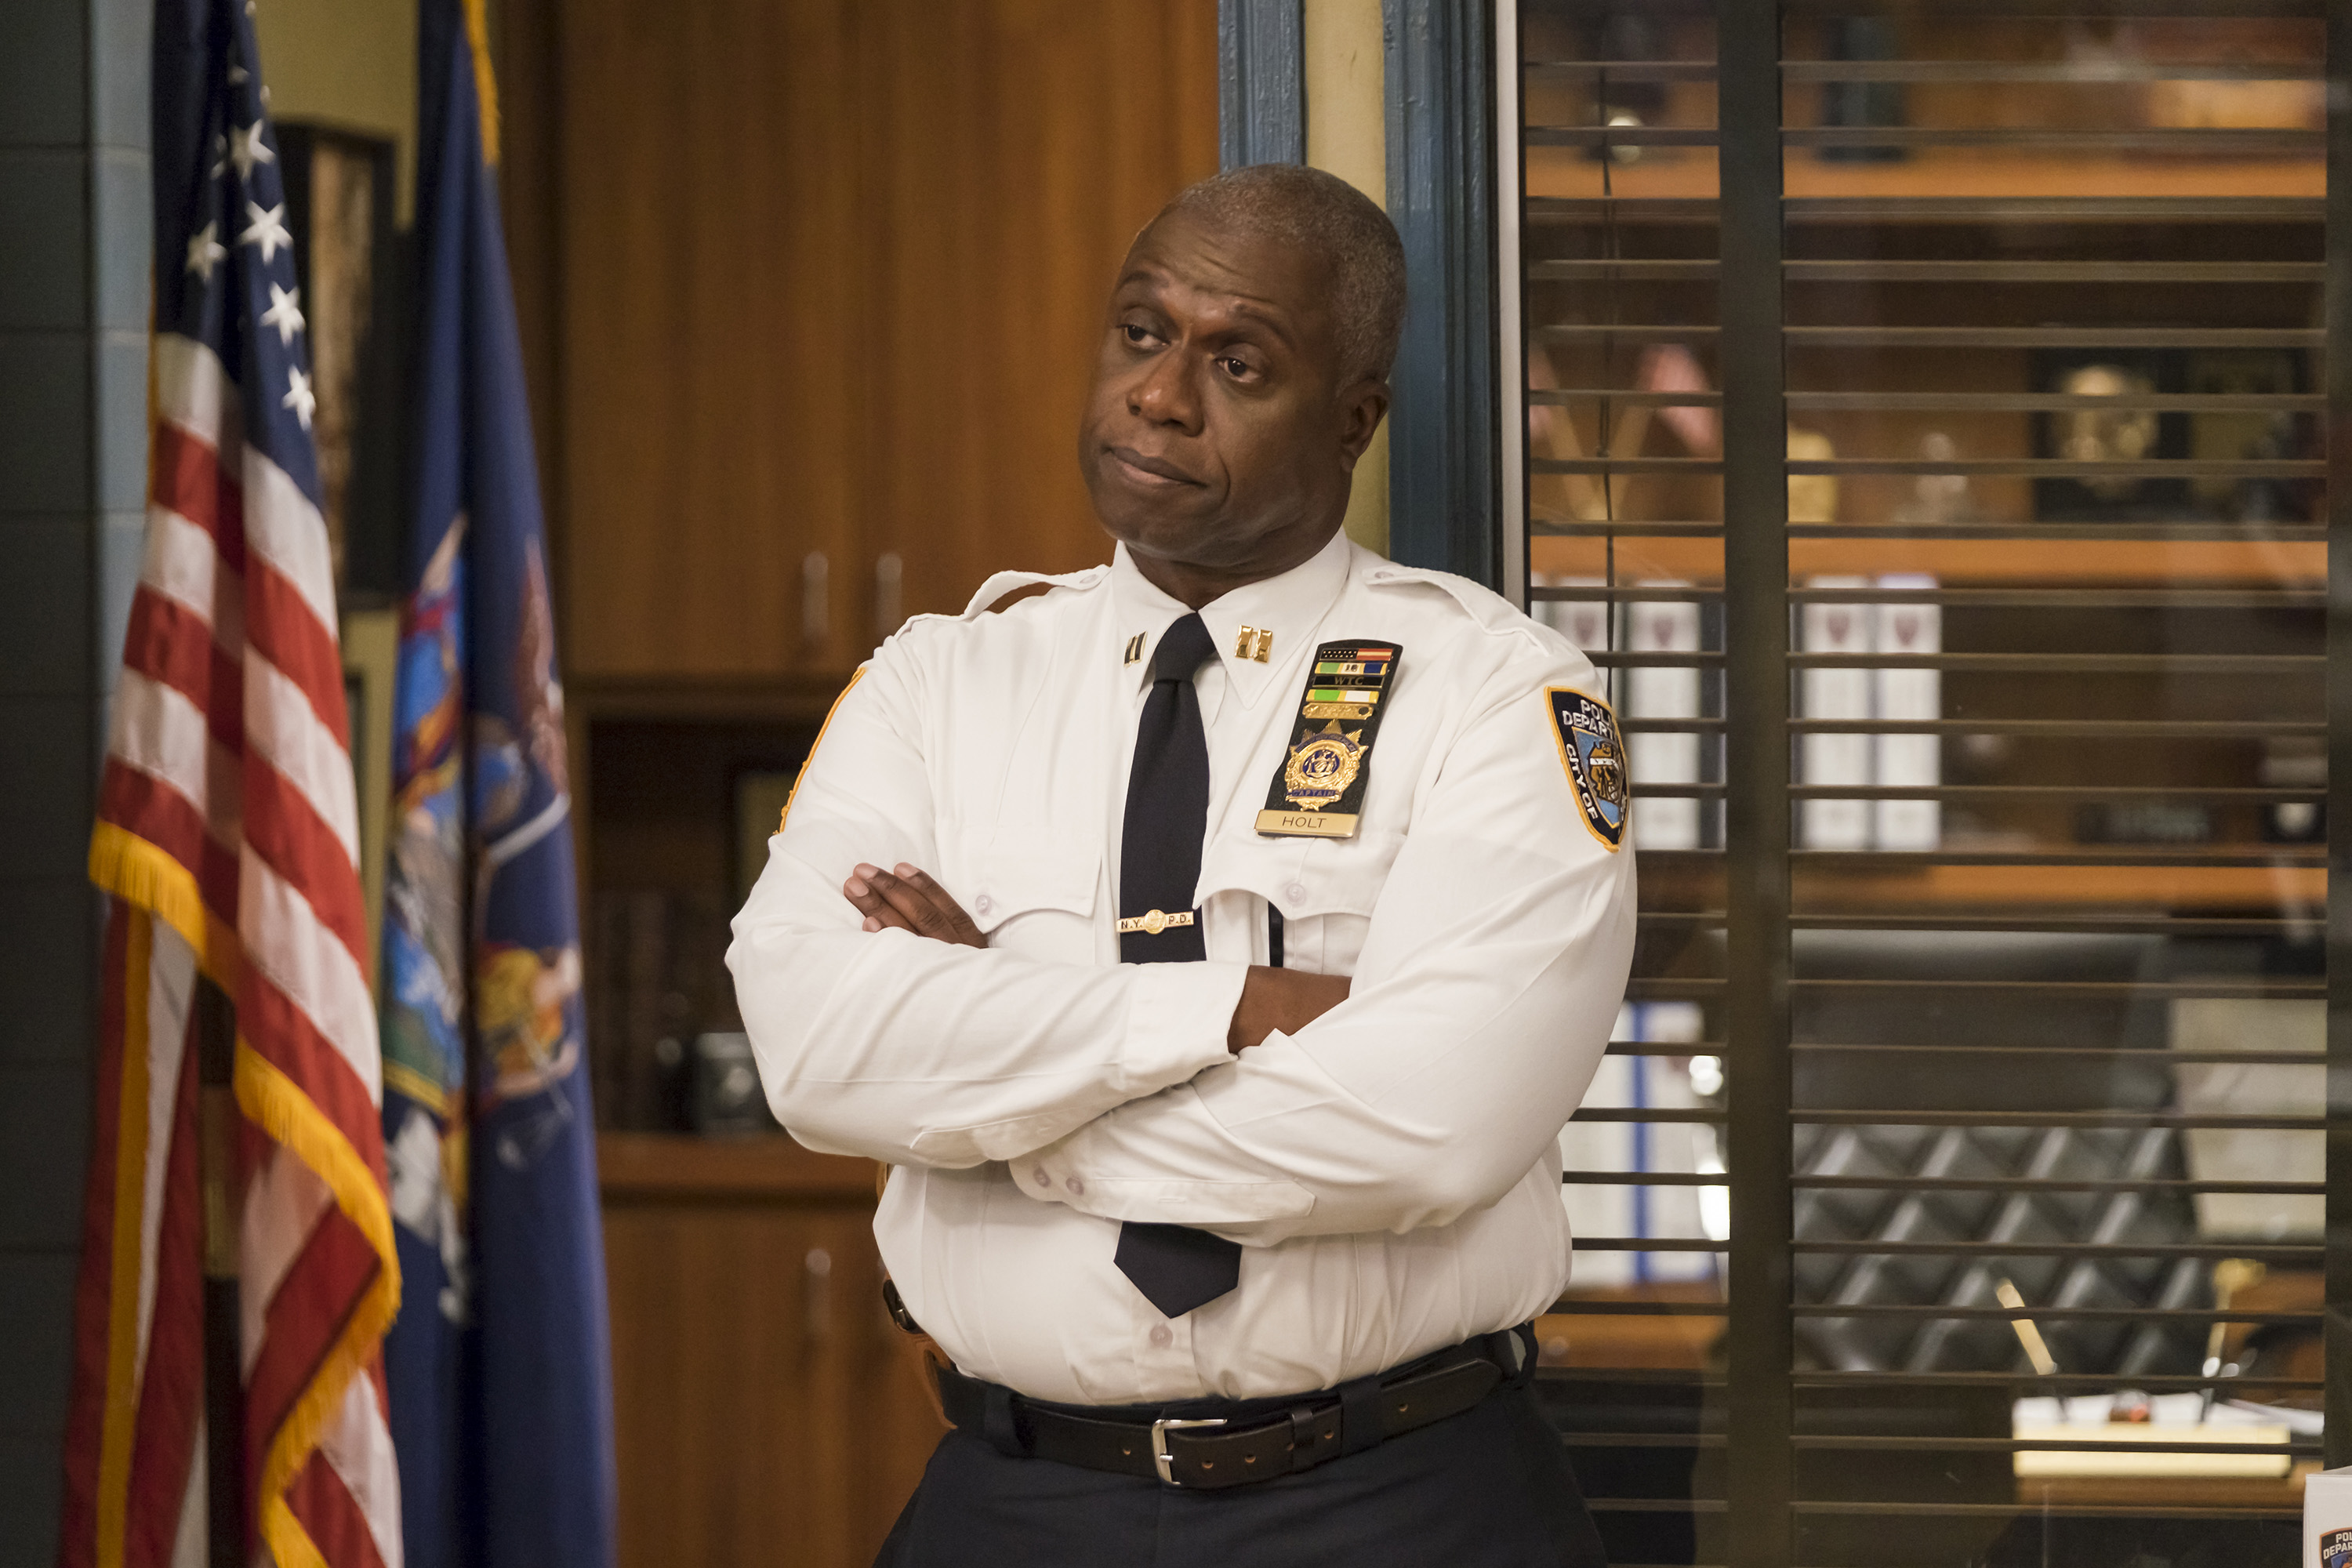 Andre Braugher in an episode of "Brooklyn Nine-Nine" in 2017. | Source: Getty Images